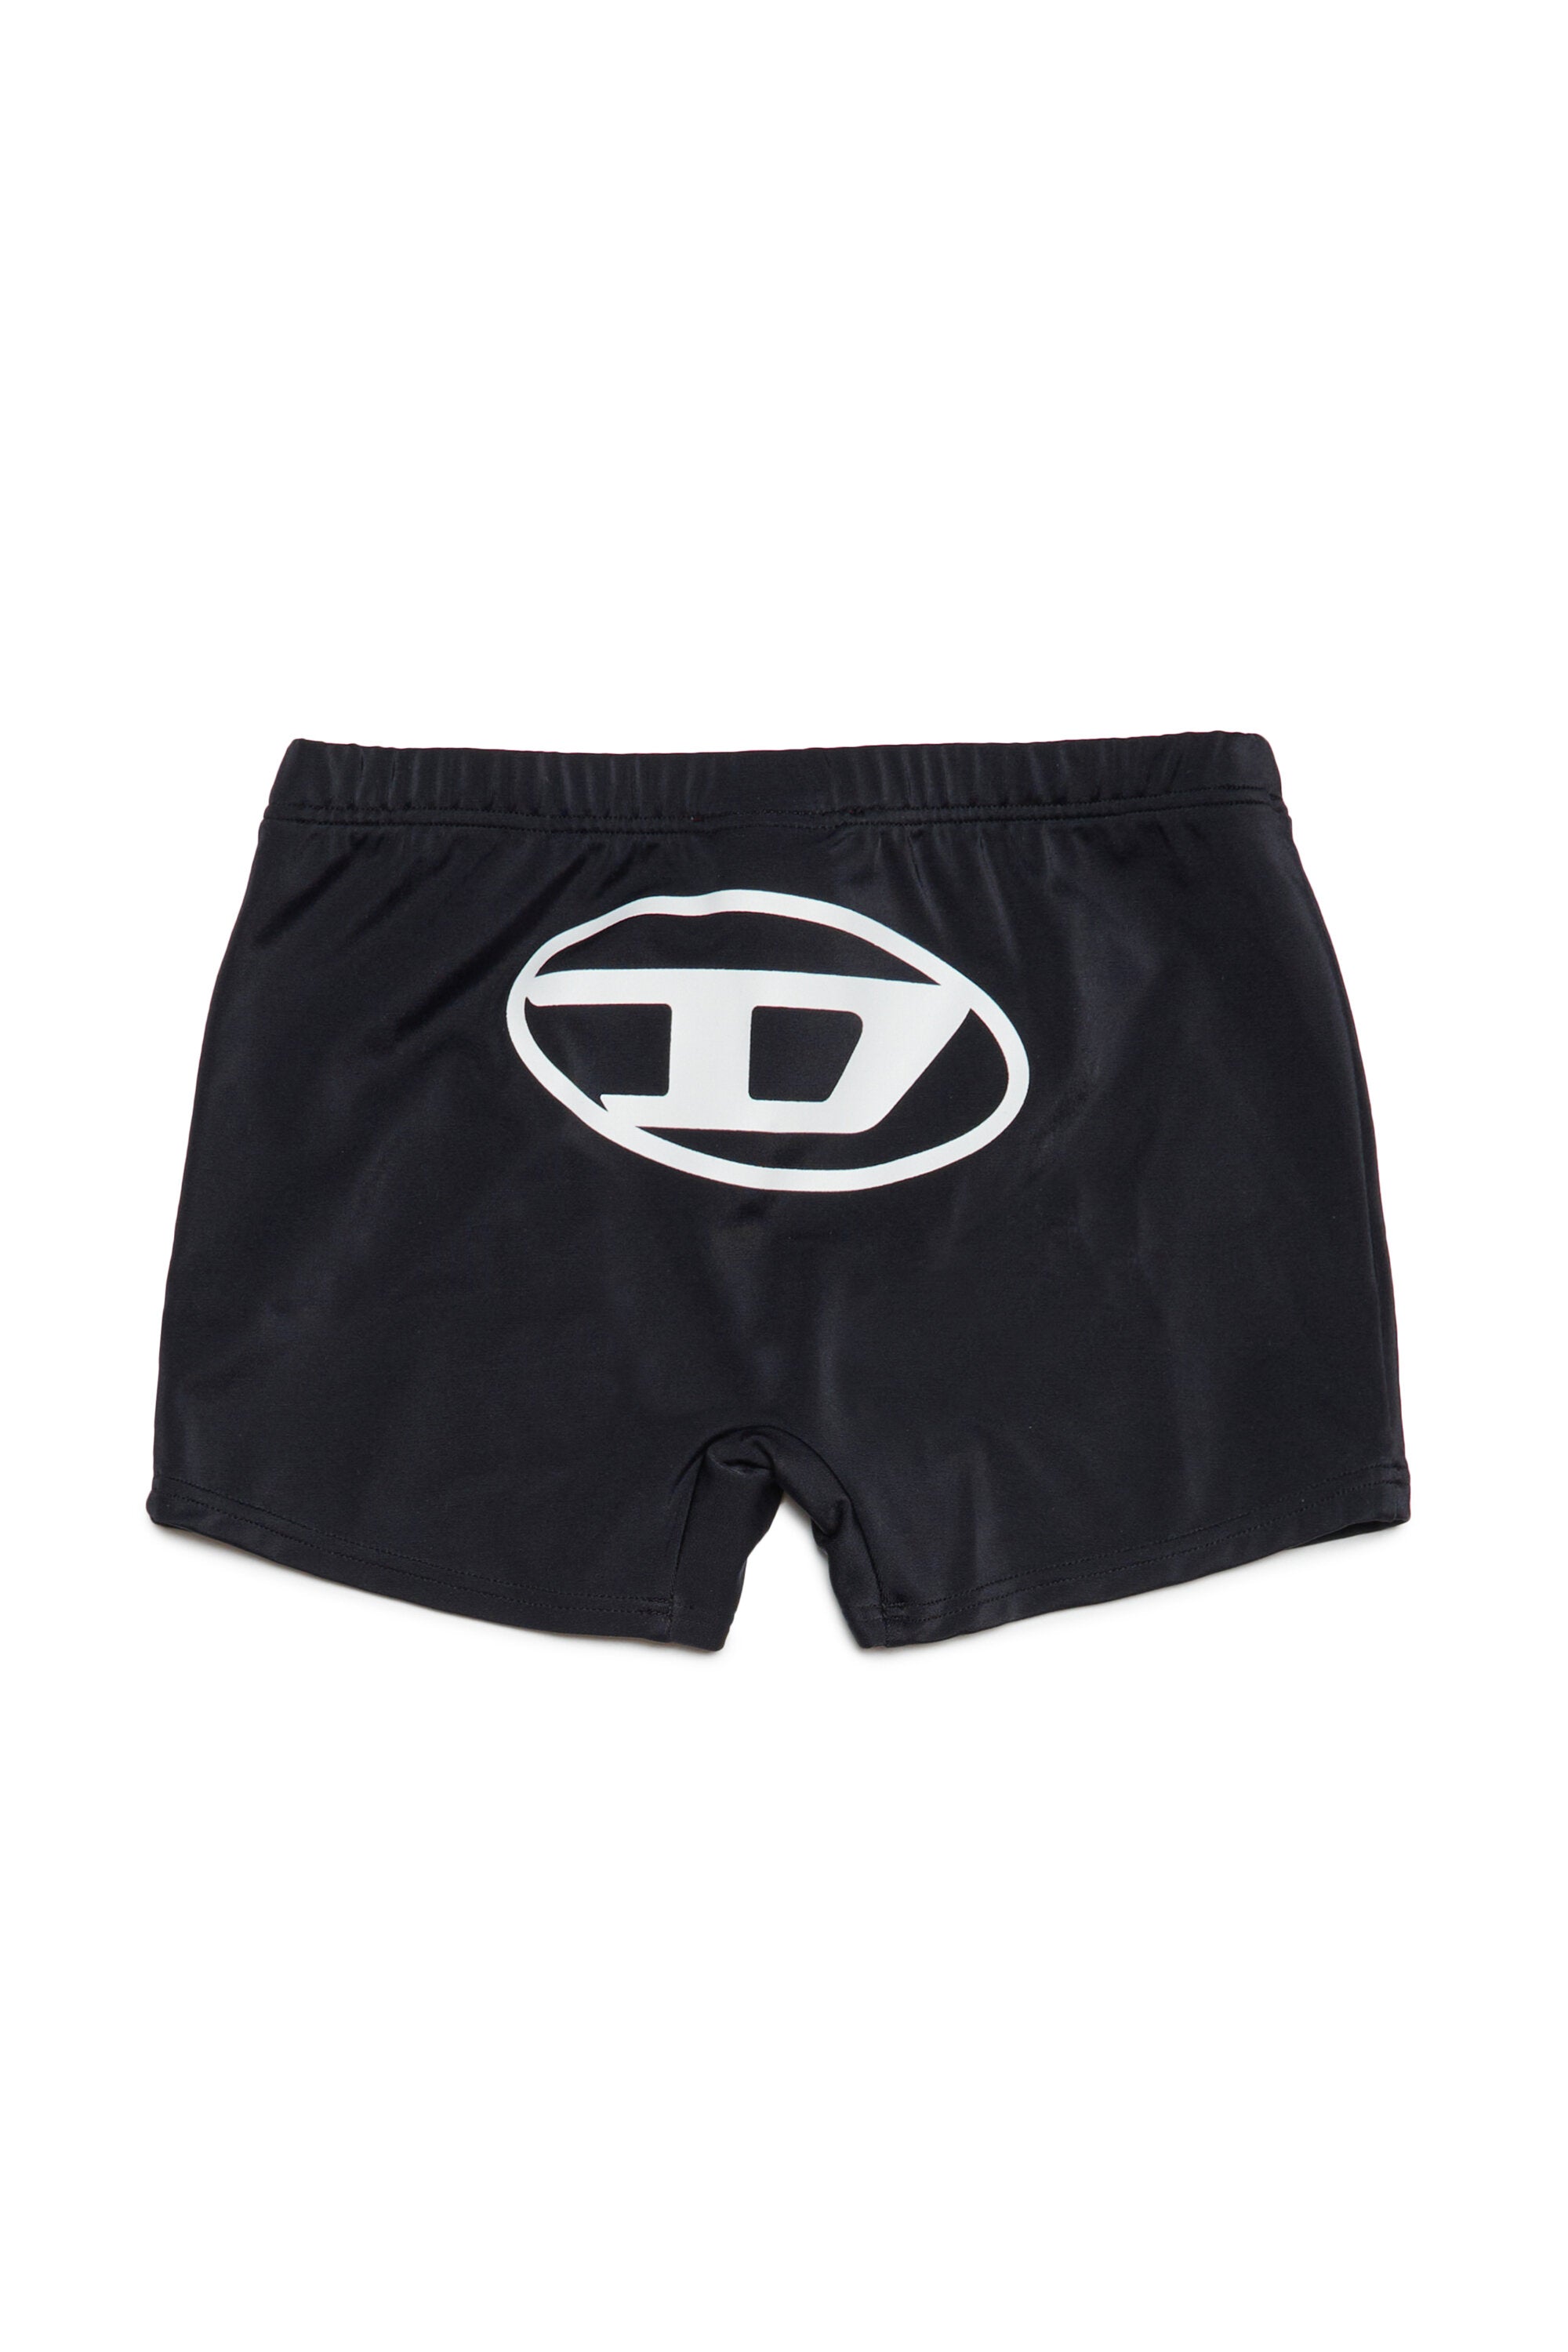 Oval D branded boxer swimsuit